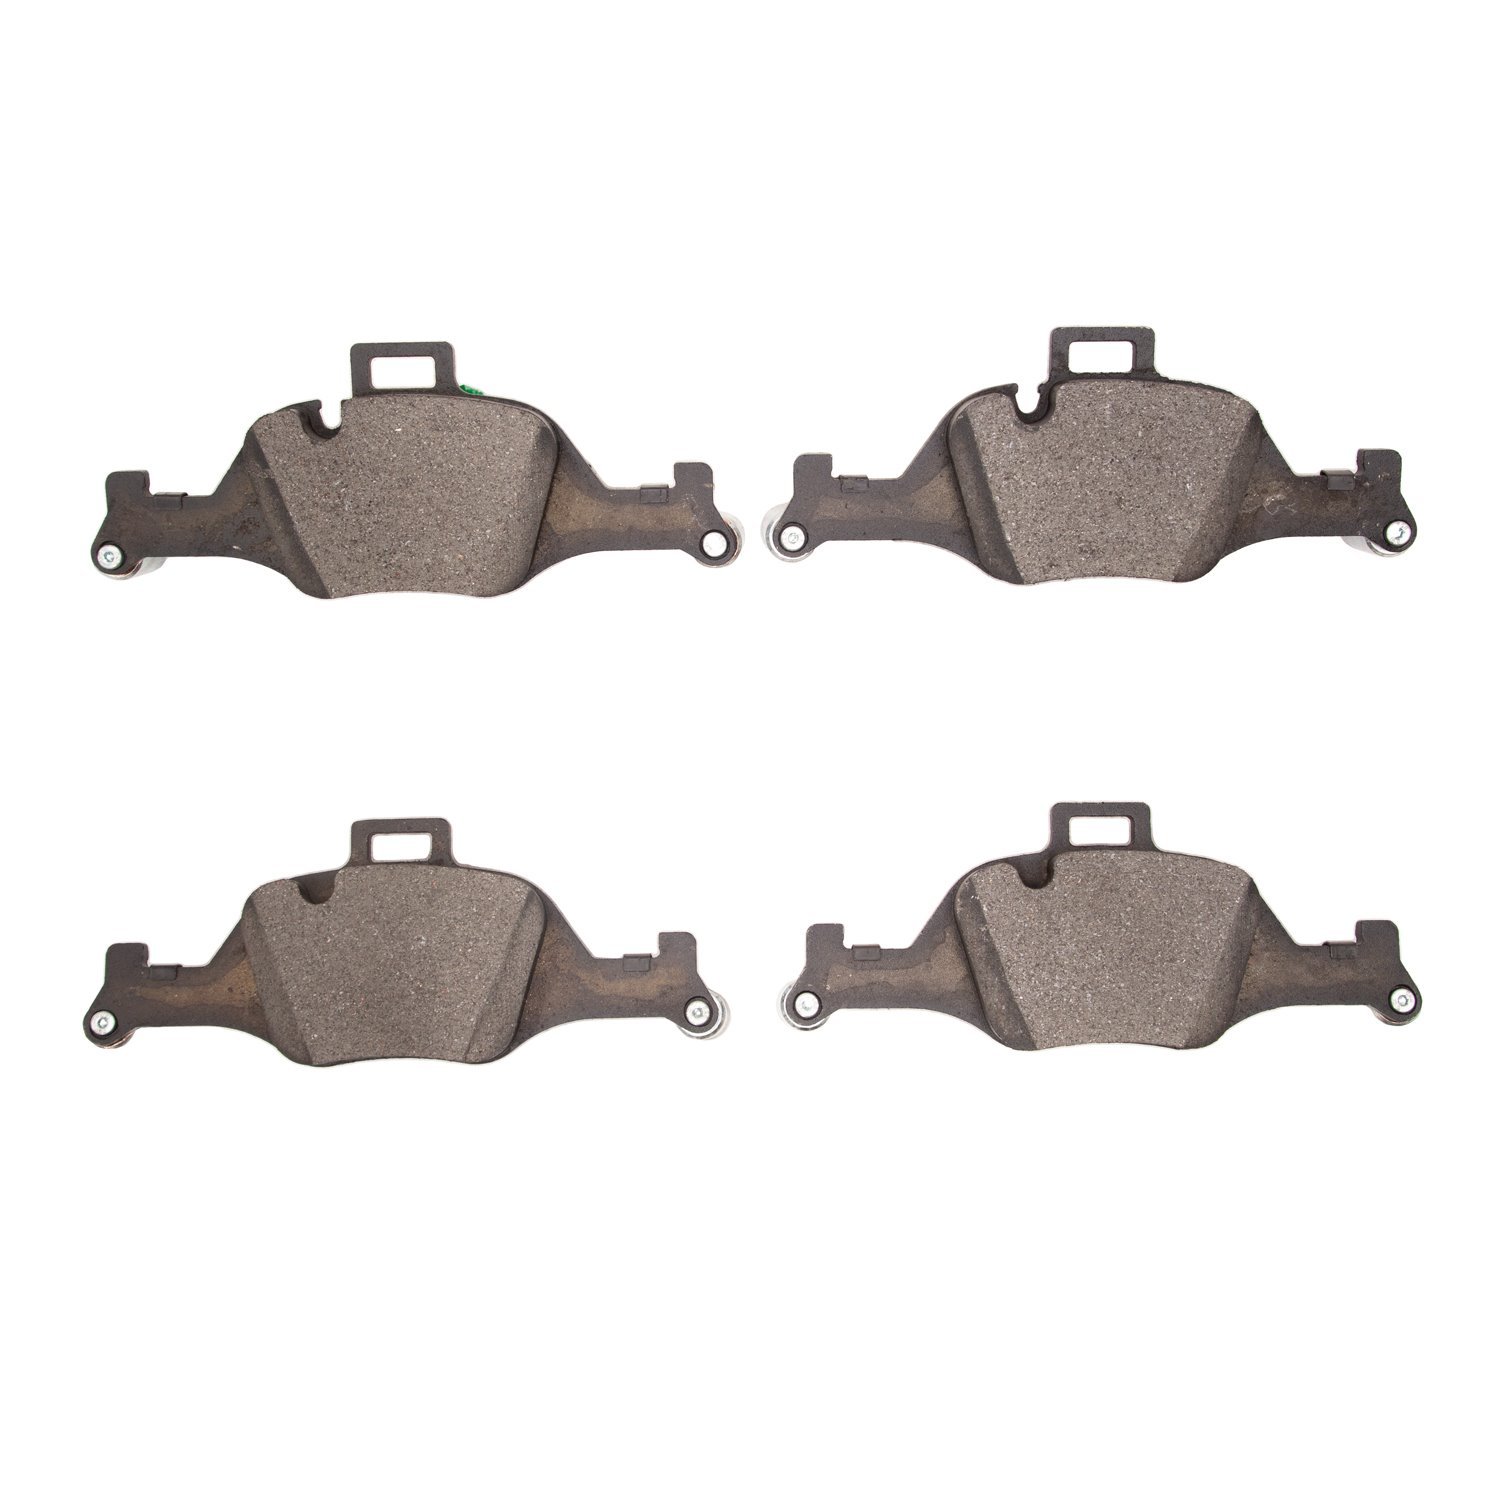 1600-2060-00 5000 Euro Ceramic Brake Pads, Fits Select BMW, Position: Front